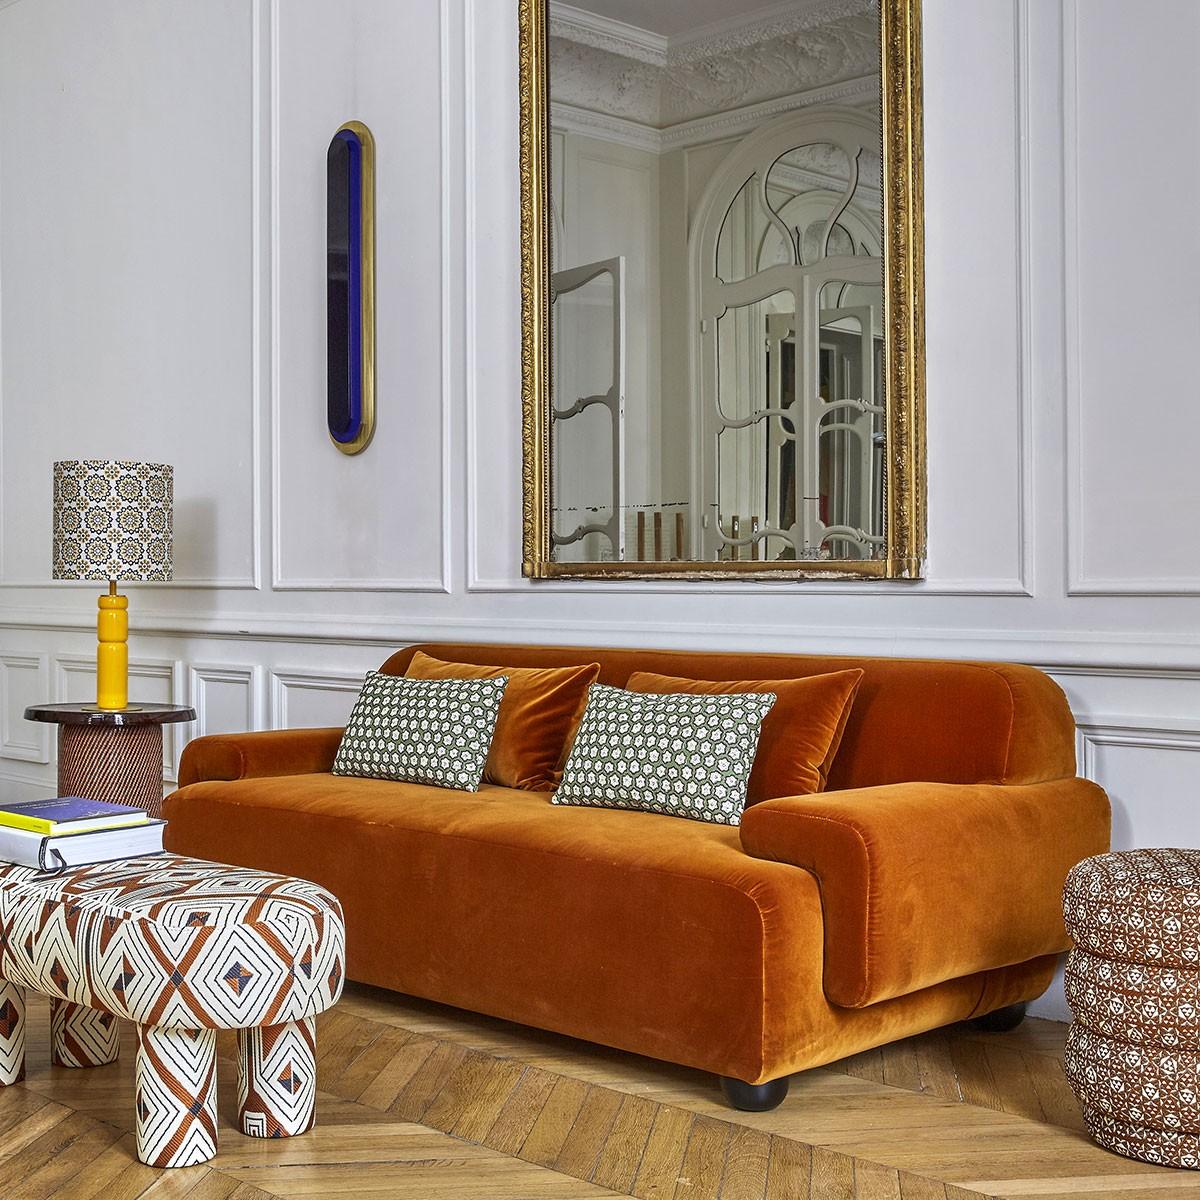 Popus Editions Lena 2.5 seater sofa in Saffron Antwerp Linen upholstery

It looks like it's straight out of a movie, with its generous curves and wide armrests. It is a real invitation to spend long Sundays with the family, comfortably seated in